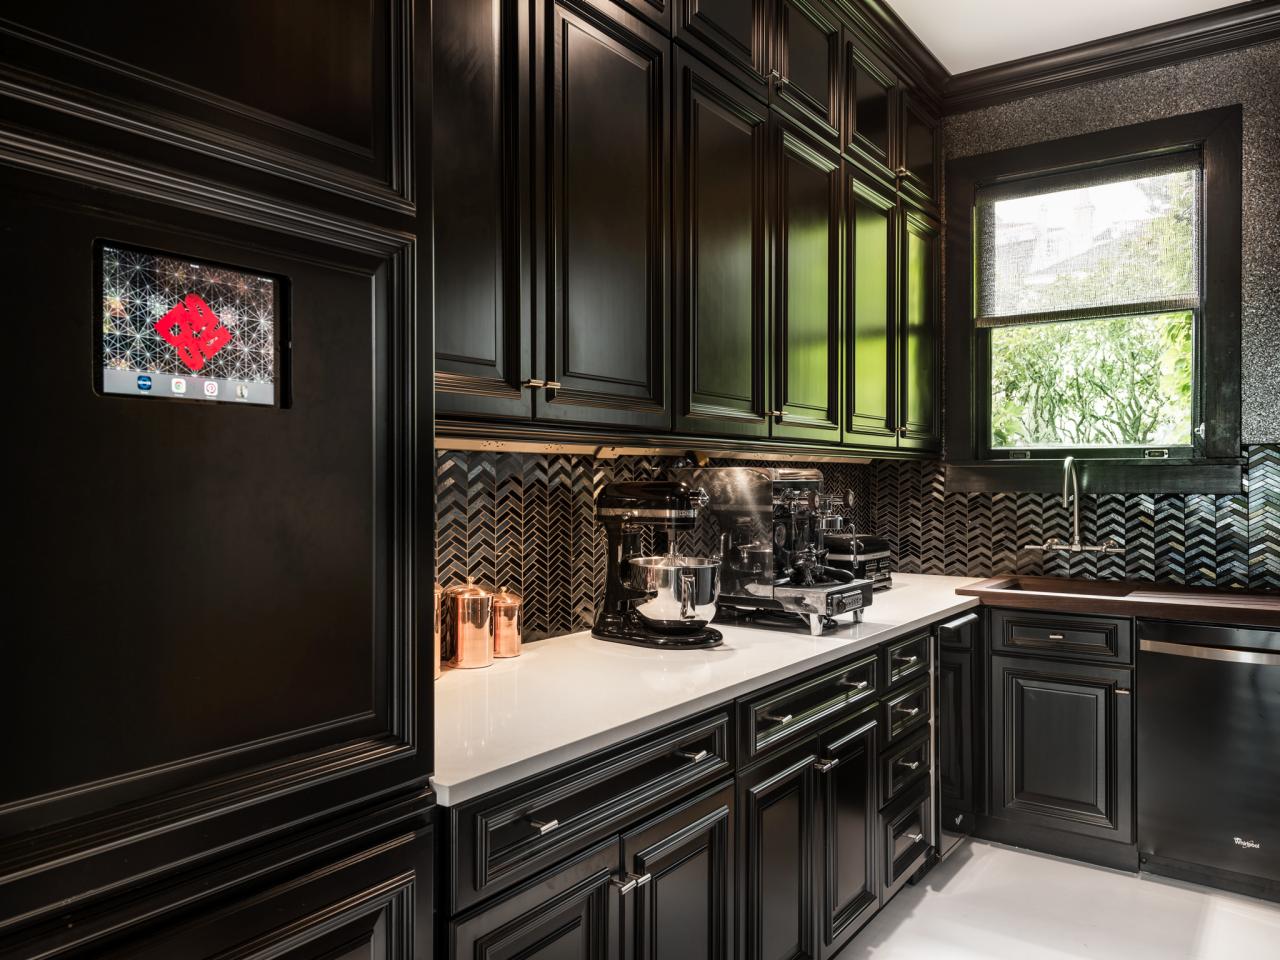 Modern Black Kitchen Cabinets For Your Home